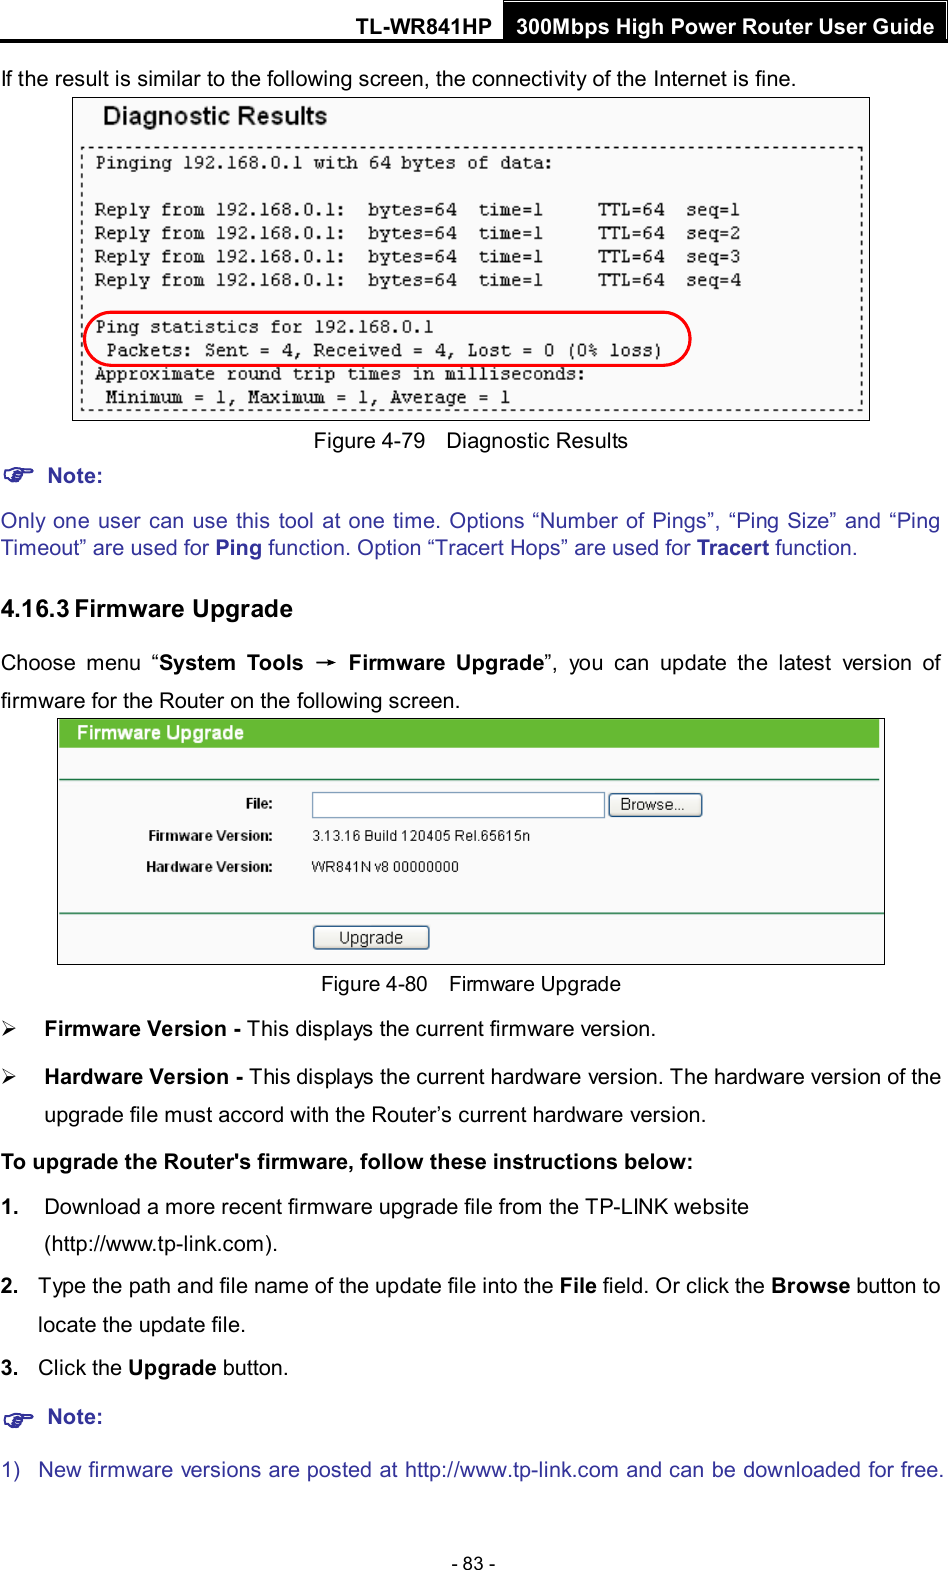 TL-WR841HP 300Mbps High Power Router User Guide  - 83 - If the result is similar to the following screen, the connectivity of the Internet is fine.  Figure 4-79  Diagnostic Results  Note: Only one user can use this tool at one time. Options “Number of Pings”, “Ping Size” and “Ping Timeout” are used for Ping function. Option “Tracert Hops” are used for Tracert function. 4.16.3 Firmware Upgrade Choose menu “System Tools → Firmware Upgrade”, you can update  the  latest version of firmware for the Router on the following screen.  Figure 4-80  Firmware Upgrade  Firmware Version - This displays the current firmware version.  Hardware Version - This displays the current hardware version. The hardware version of the upgrade file must accord with the Router’s current hardware version. To upgrade the Router&apos;s firmware, follow these instructions below: 1. Download a more recent firmware upgrade file from the TP-LINK website (http://www.tp-link.com).   2. Type the path and file name of the update file into the File field. Or click the Browse button to locate the update file. 3. Click the Upgrade button.  Note: 1) New firmware versions are posted at http://www.tp-link.com and can be downloaded for free. 